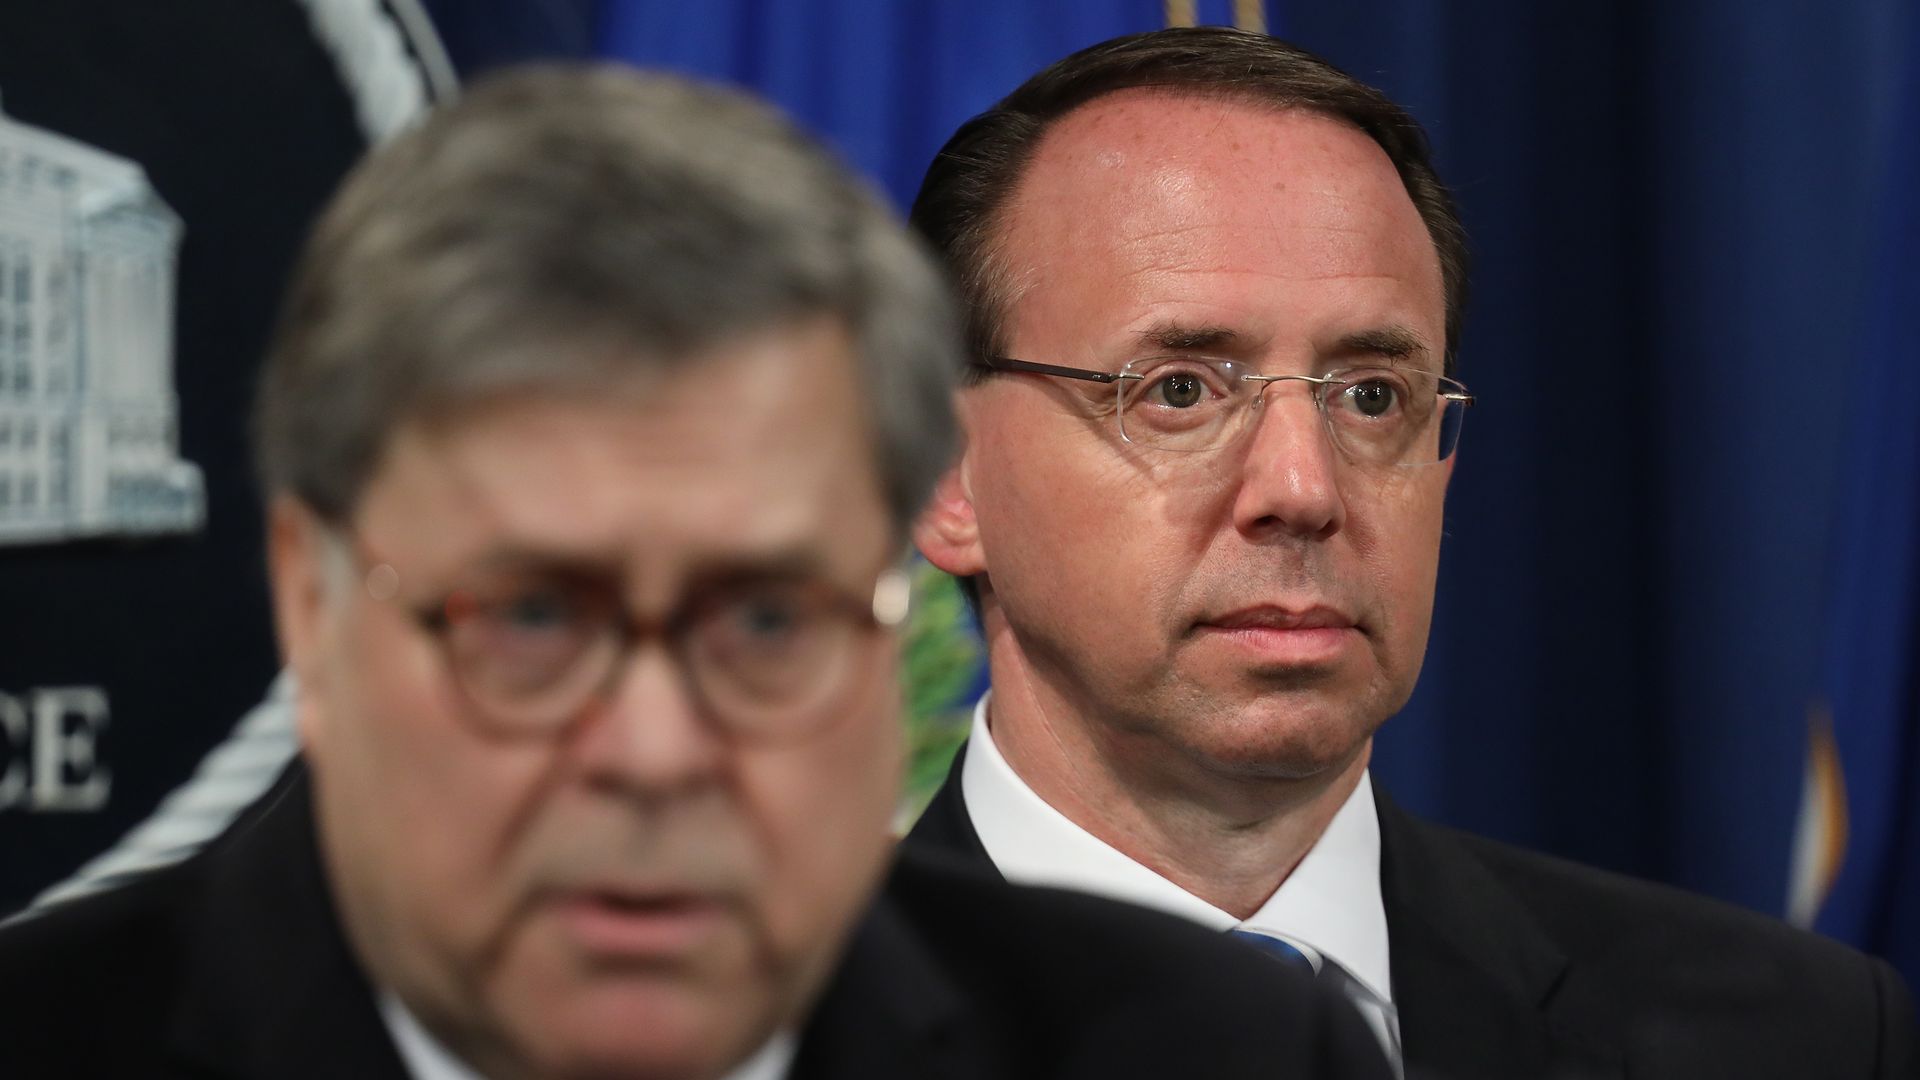 In this image, Rod stands behind Bill Barr in sharp focus while Barr is slightly blurred and unfocused through the camera lens.